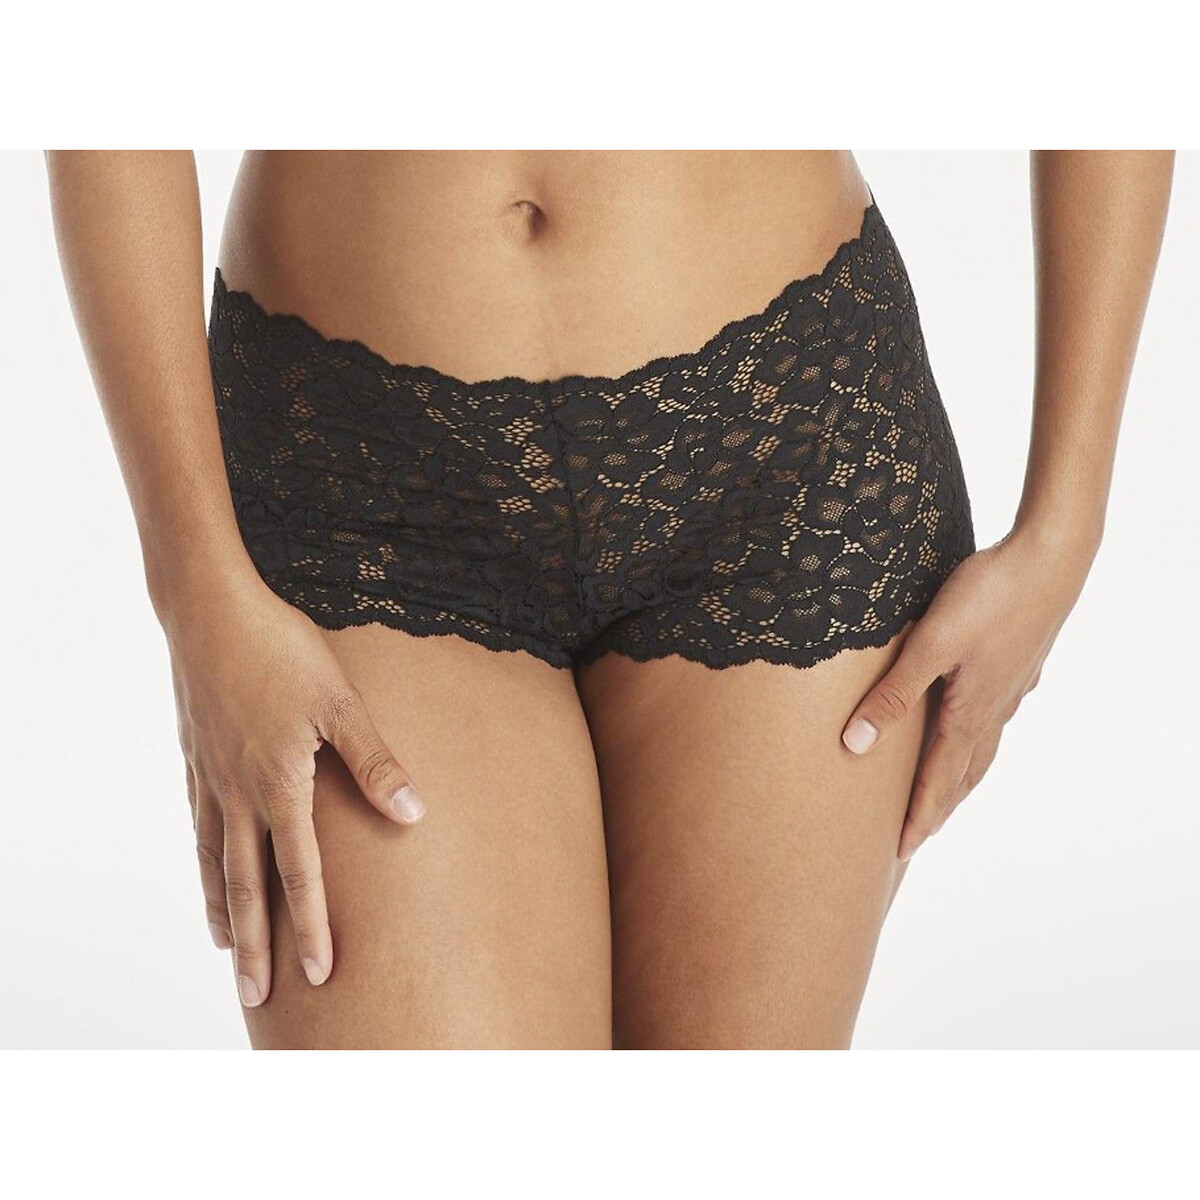 Image of Cheeky Crochet Lace Shorts